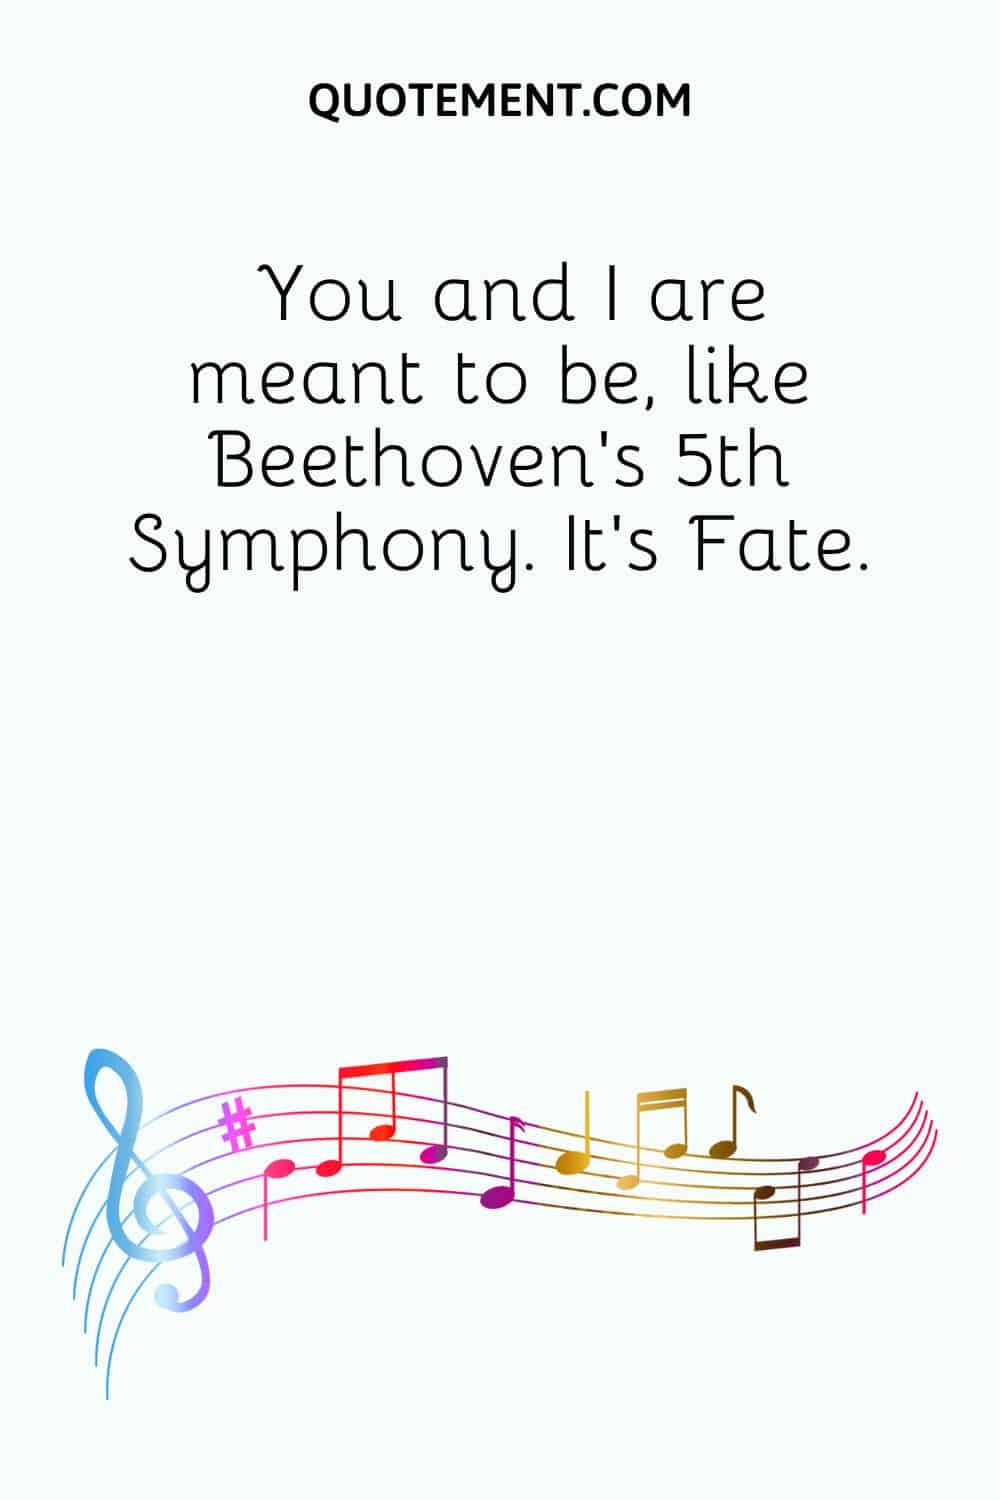 You and I are meant to be, like Beethoven’s 5th Symphony. It’s Fate